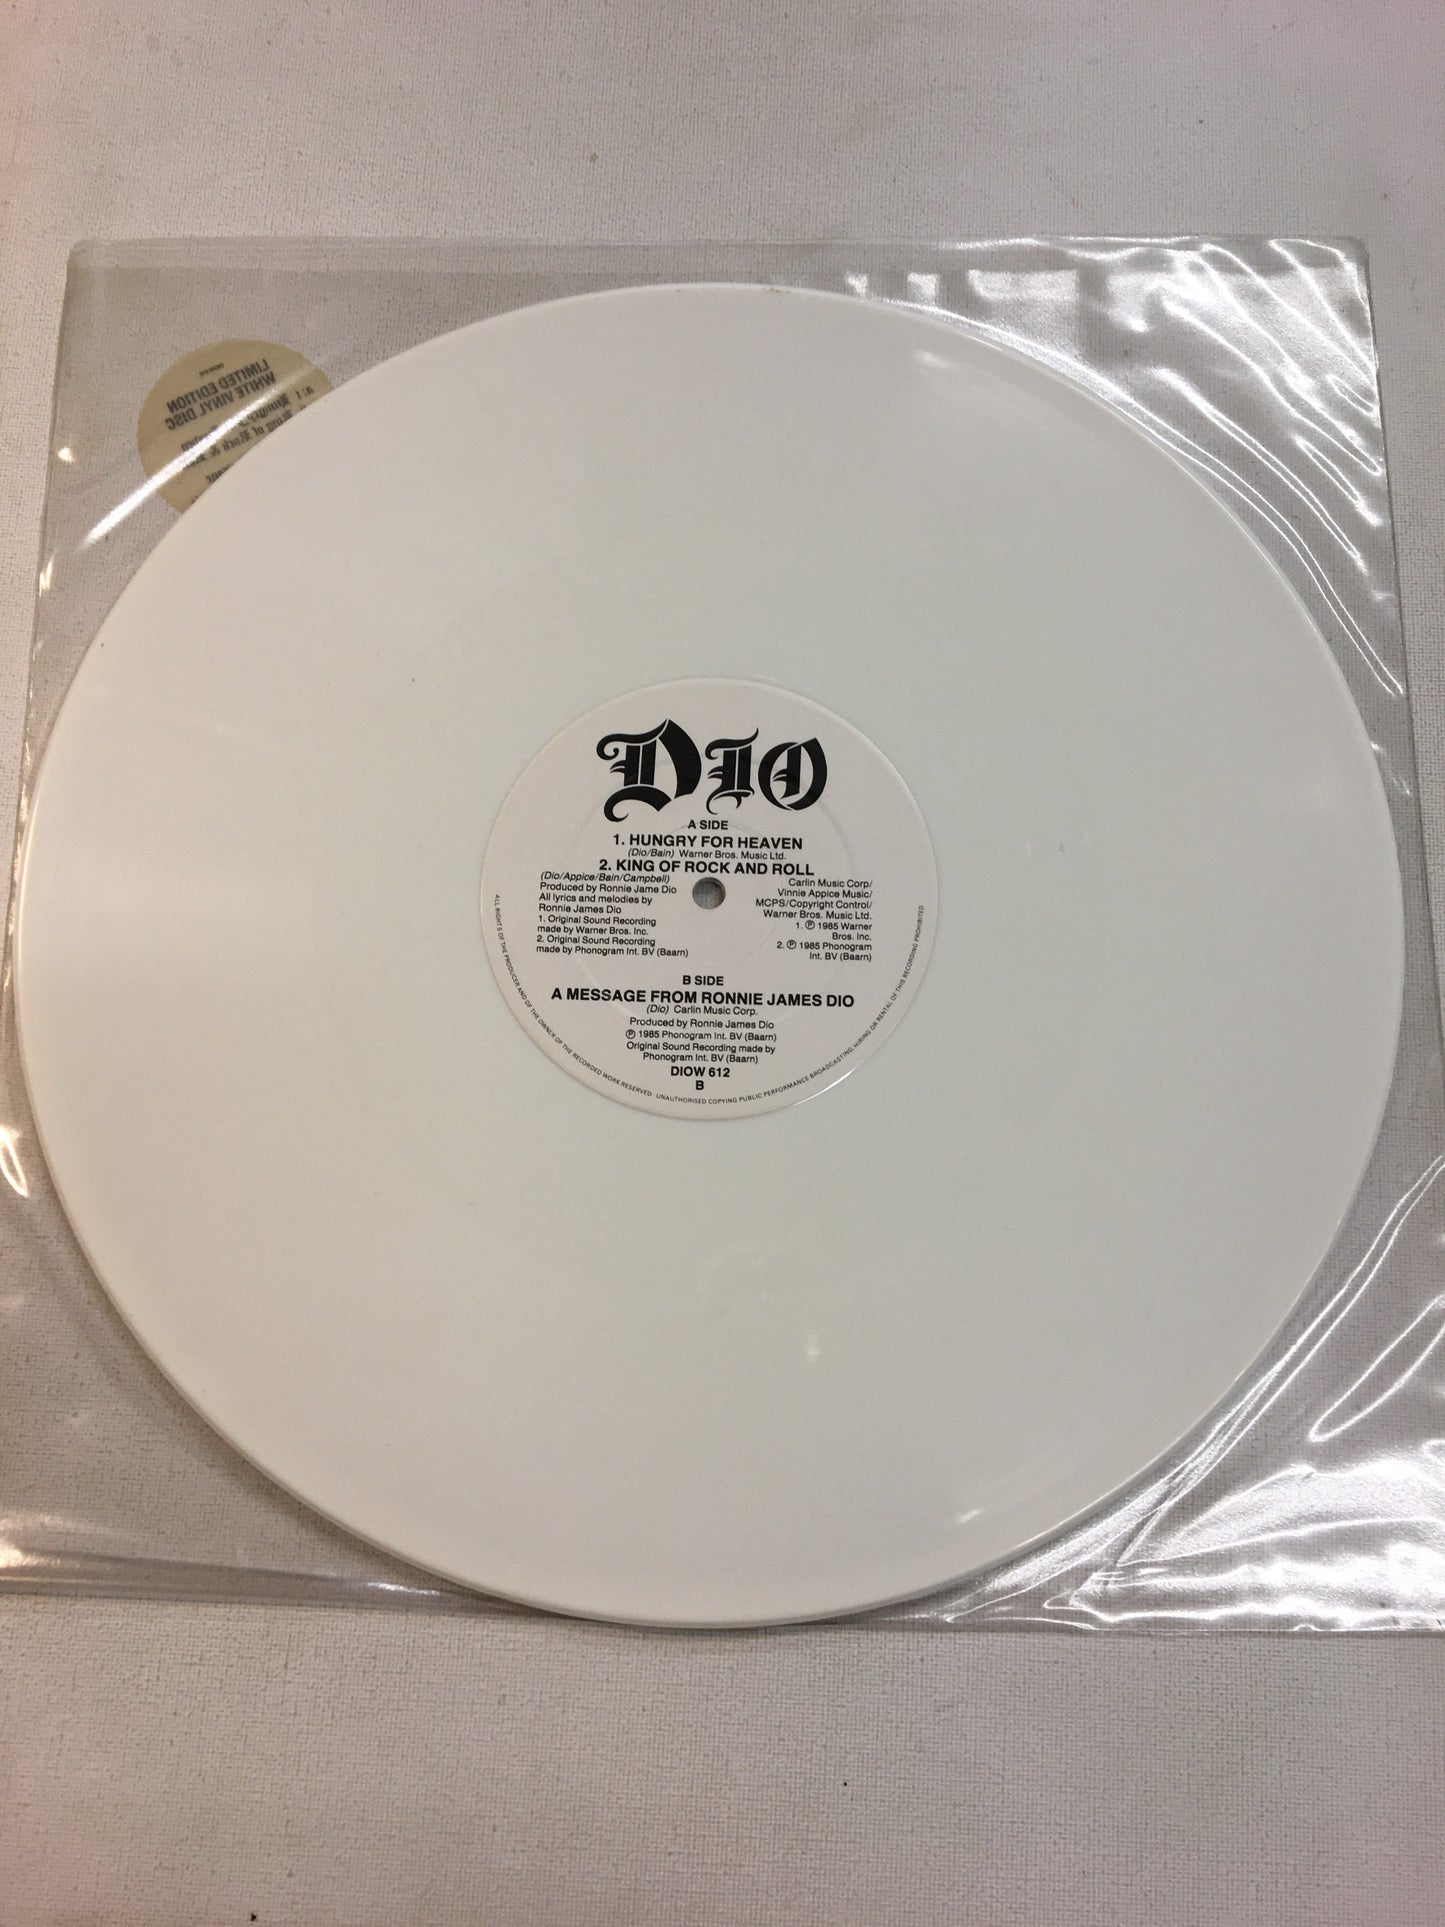 DIO LIMITED EDITION 12” ; HUNGRY FOR HEAVEN